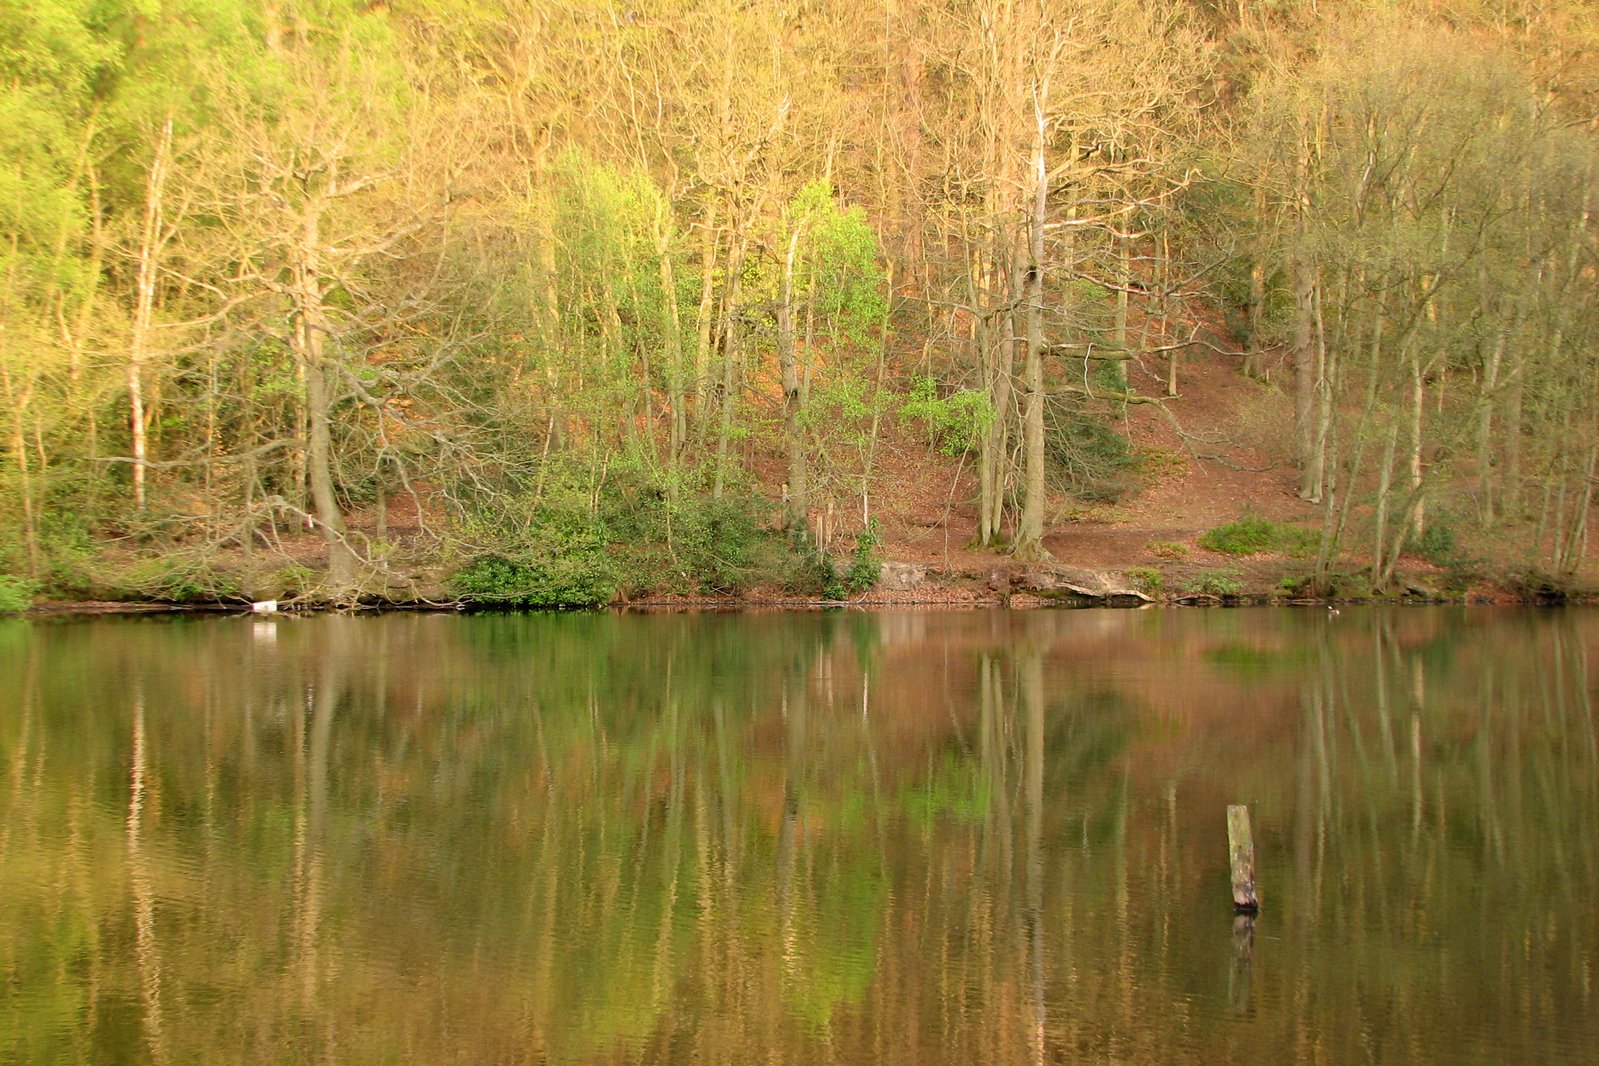 a view of the lake in the middle of a wooded area